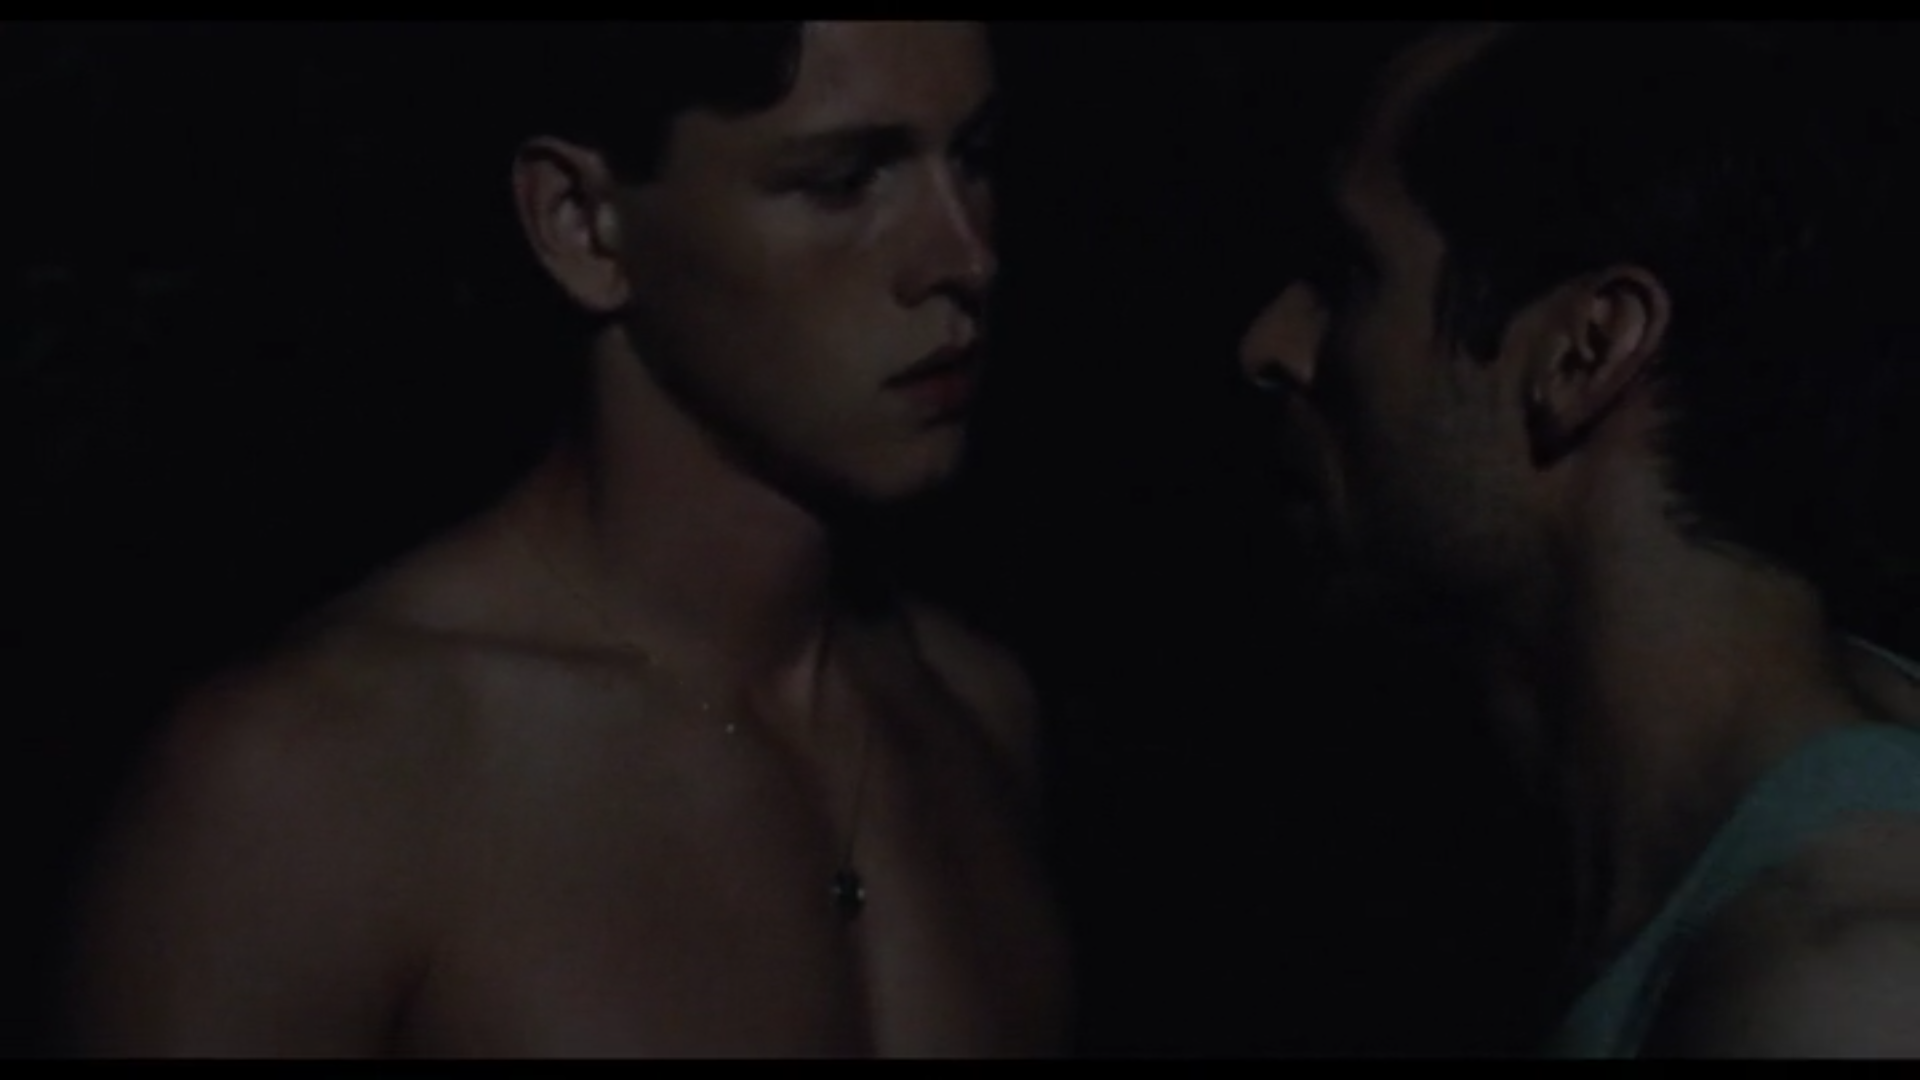 a shirtless man faces another man in the dark